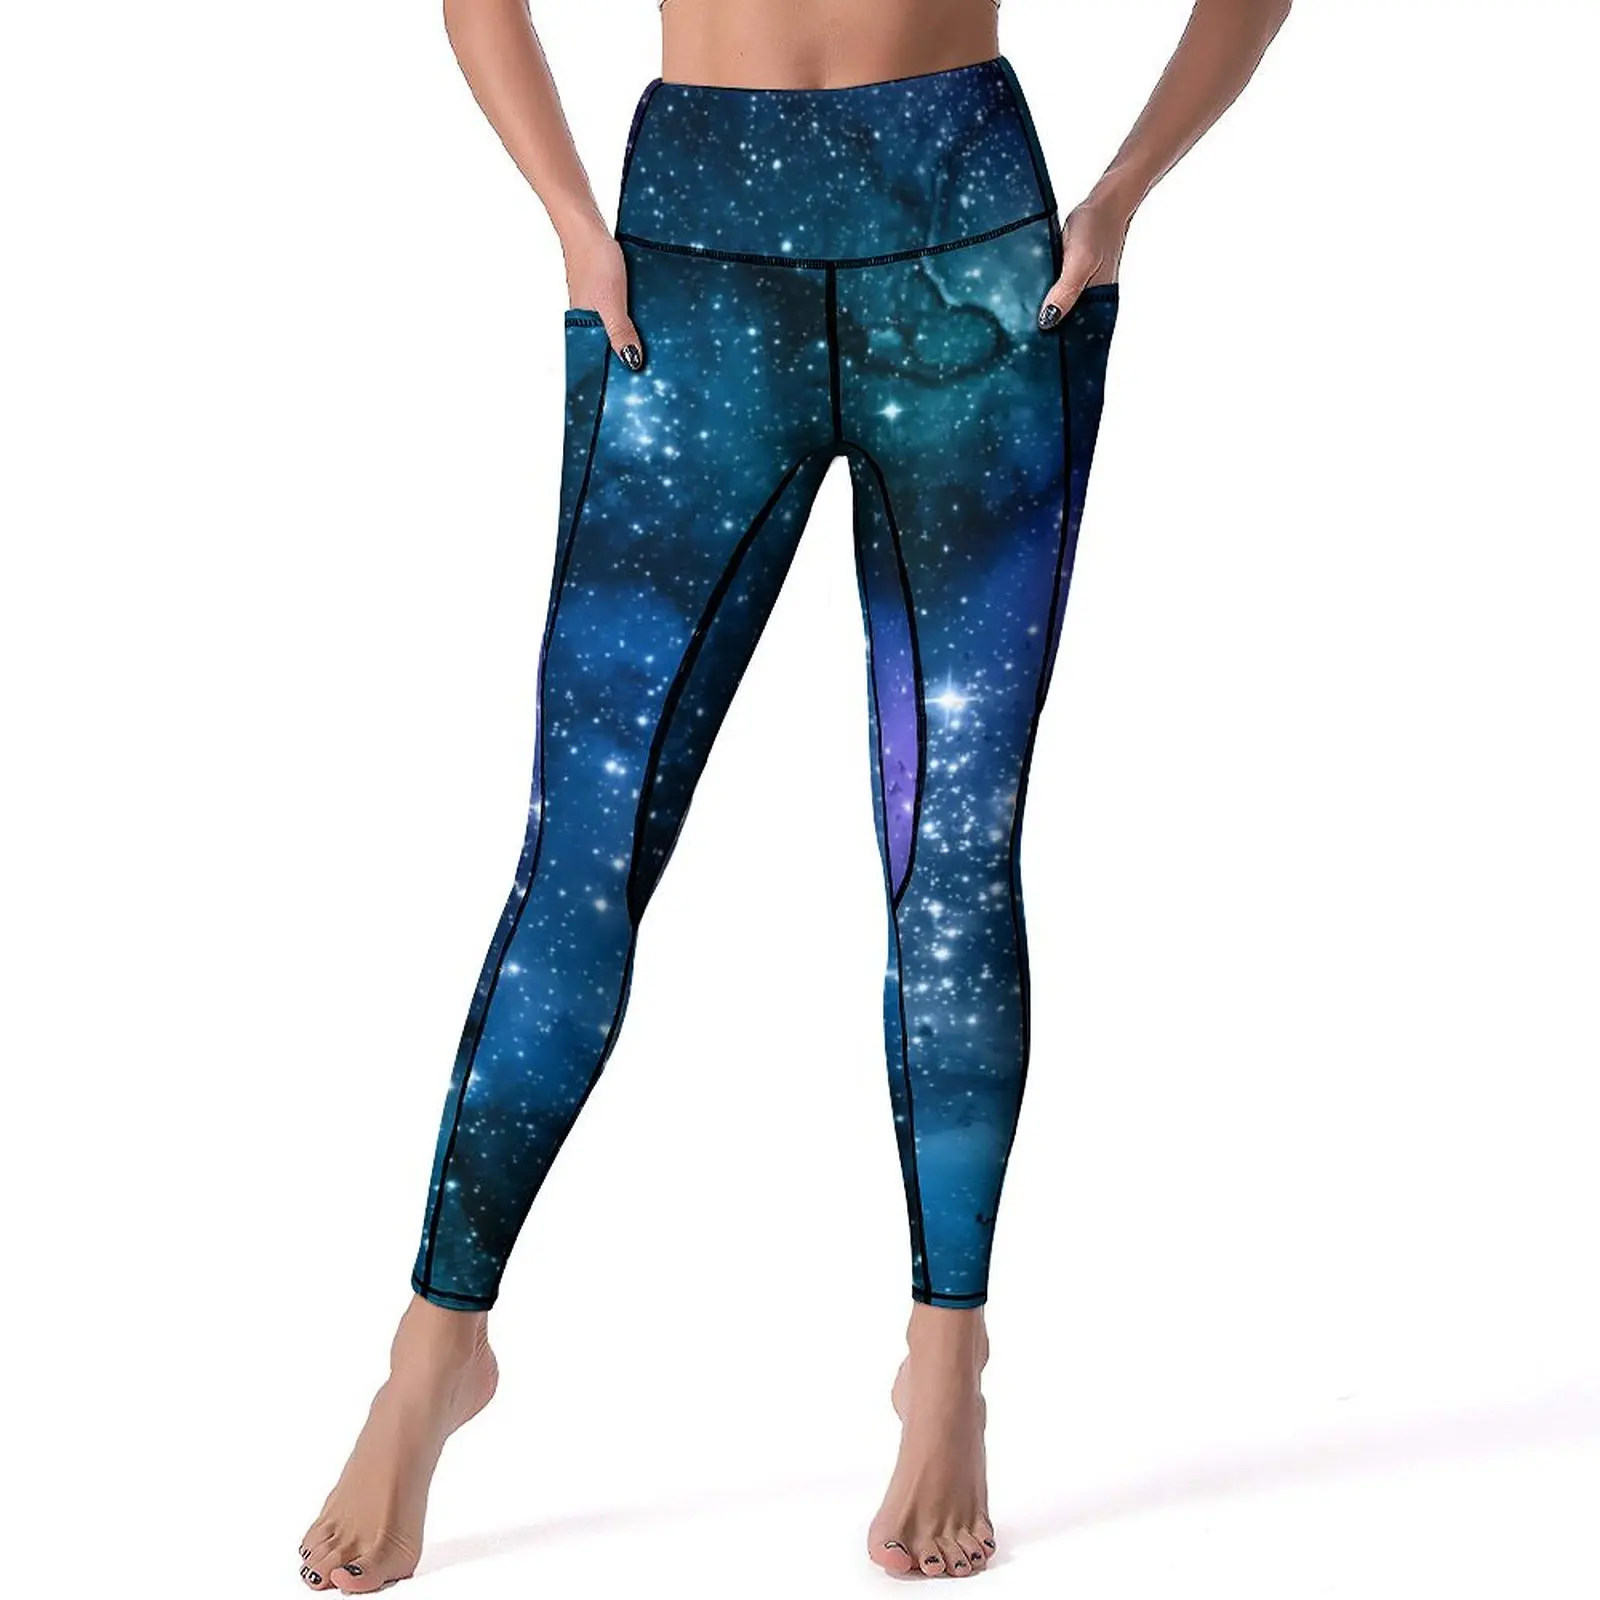 

Galaxy Lovers Leggings Sexy Starry Space Blue Sky Workout Yoga Pants Push Up Stretch Legging Pockets Vintage Design Leggins